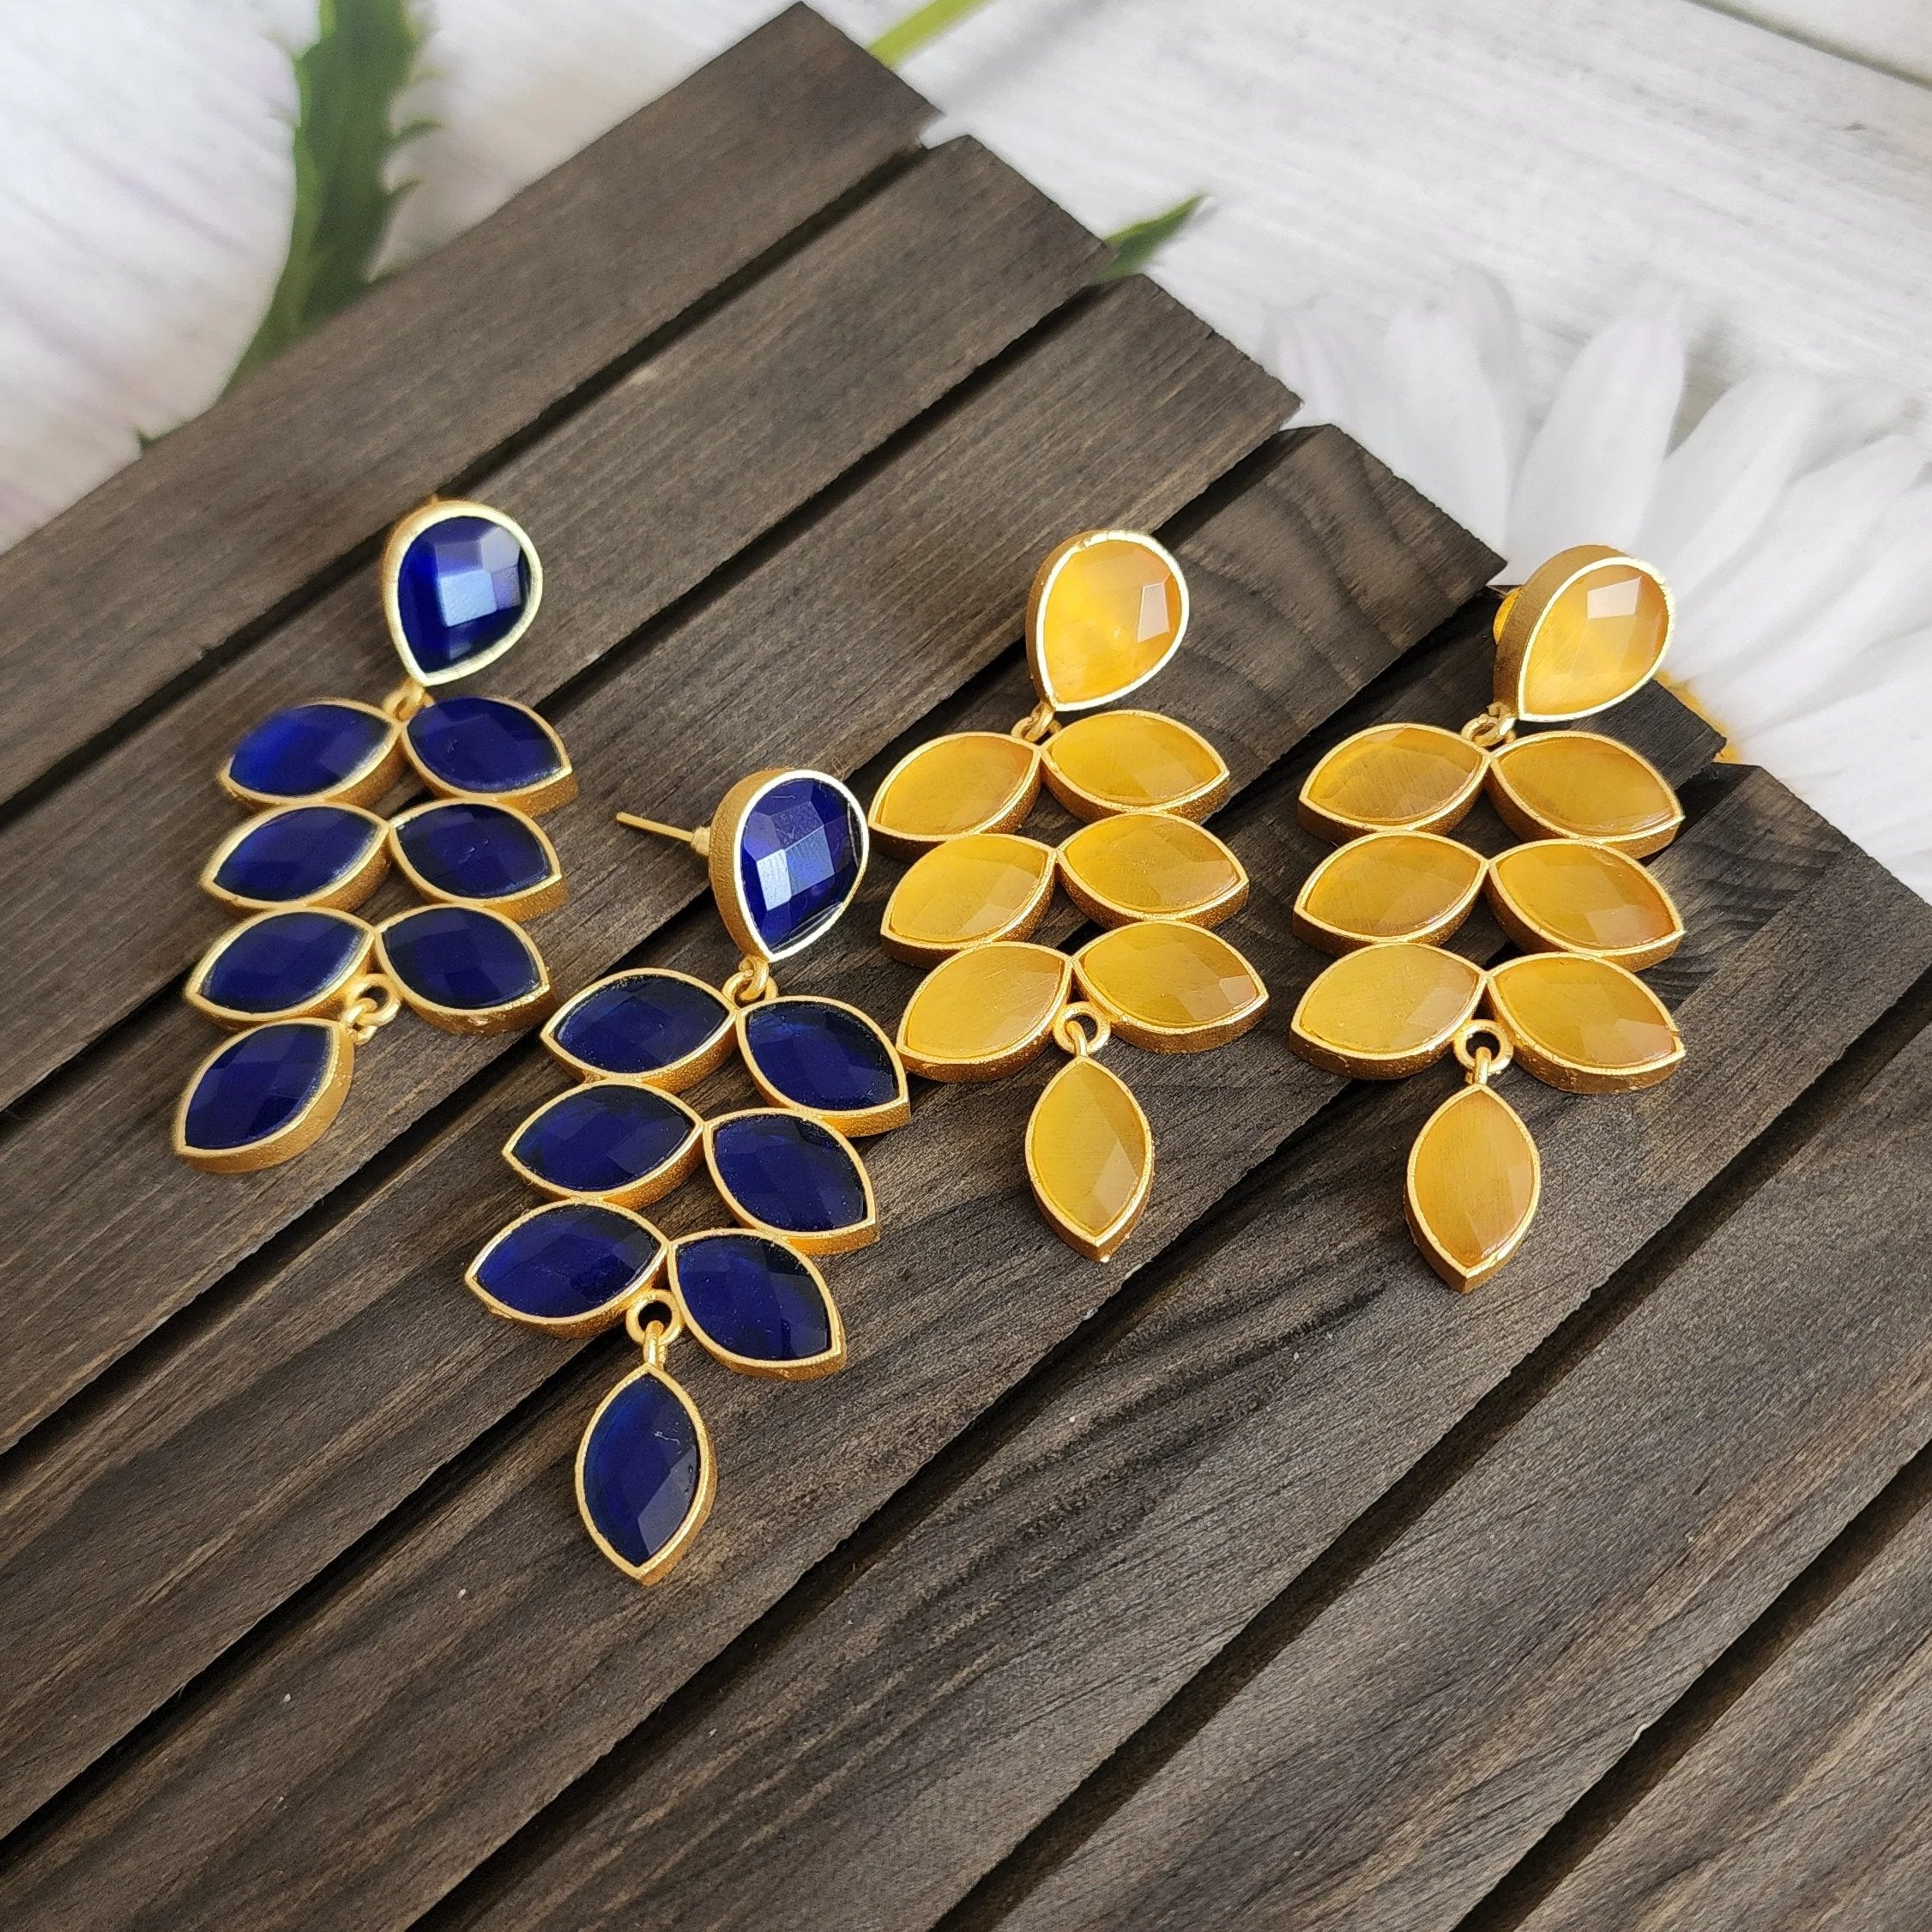 Leaf contemporary earrings